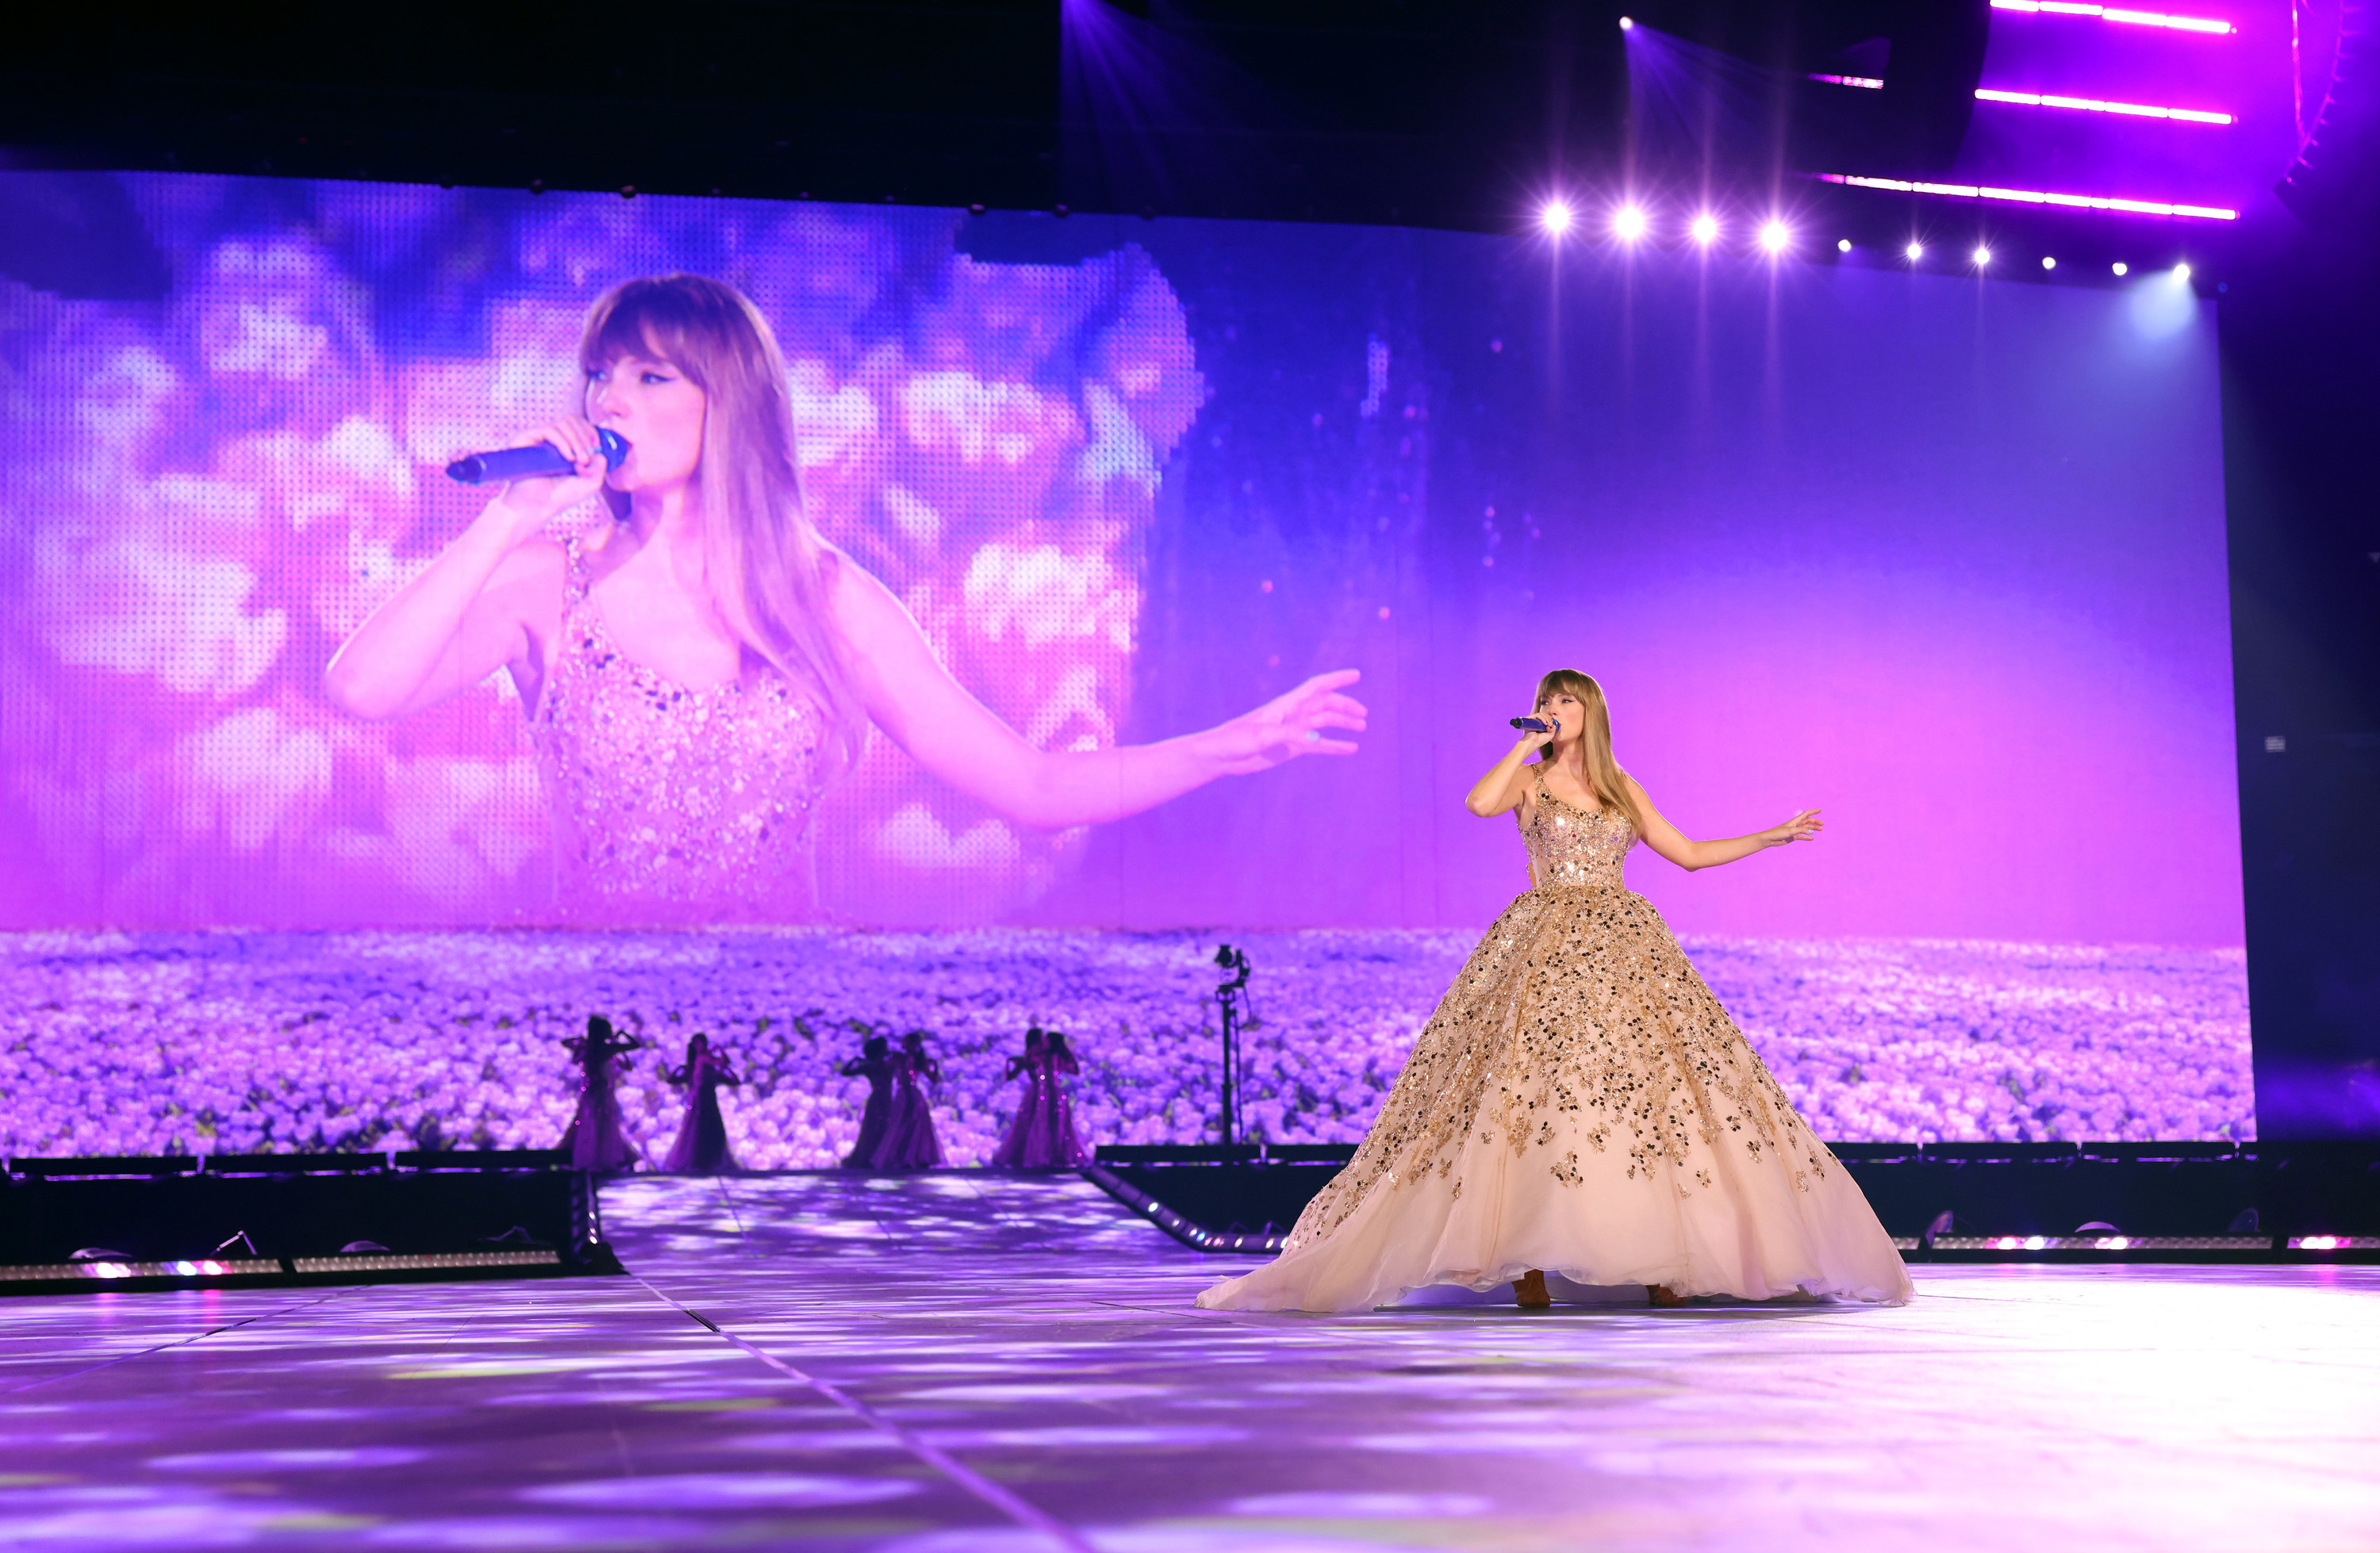 Taylor Swift in a glamorous ballgown during The Eras Tour